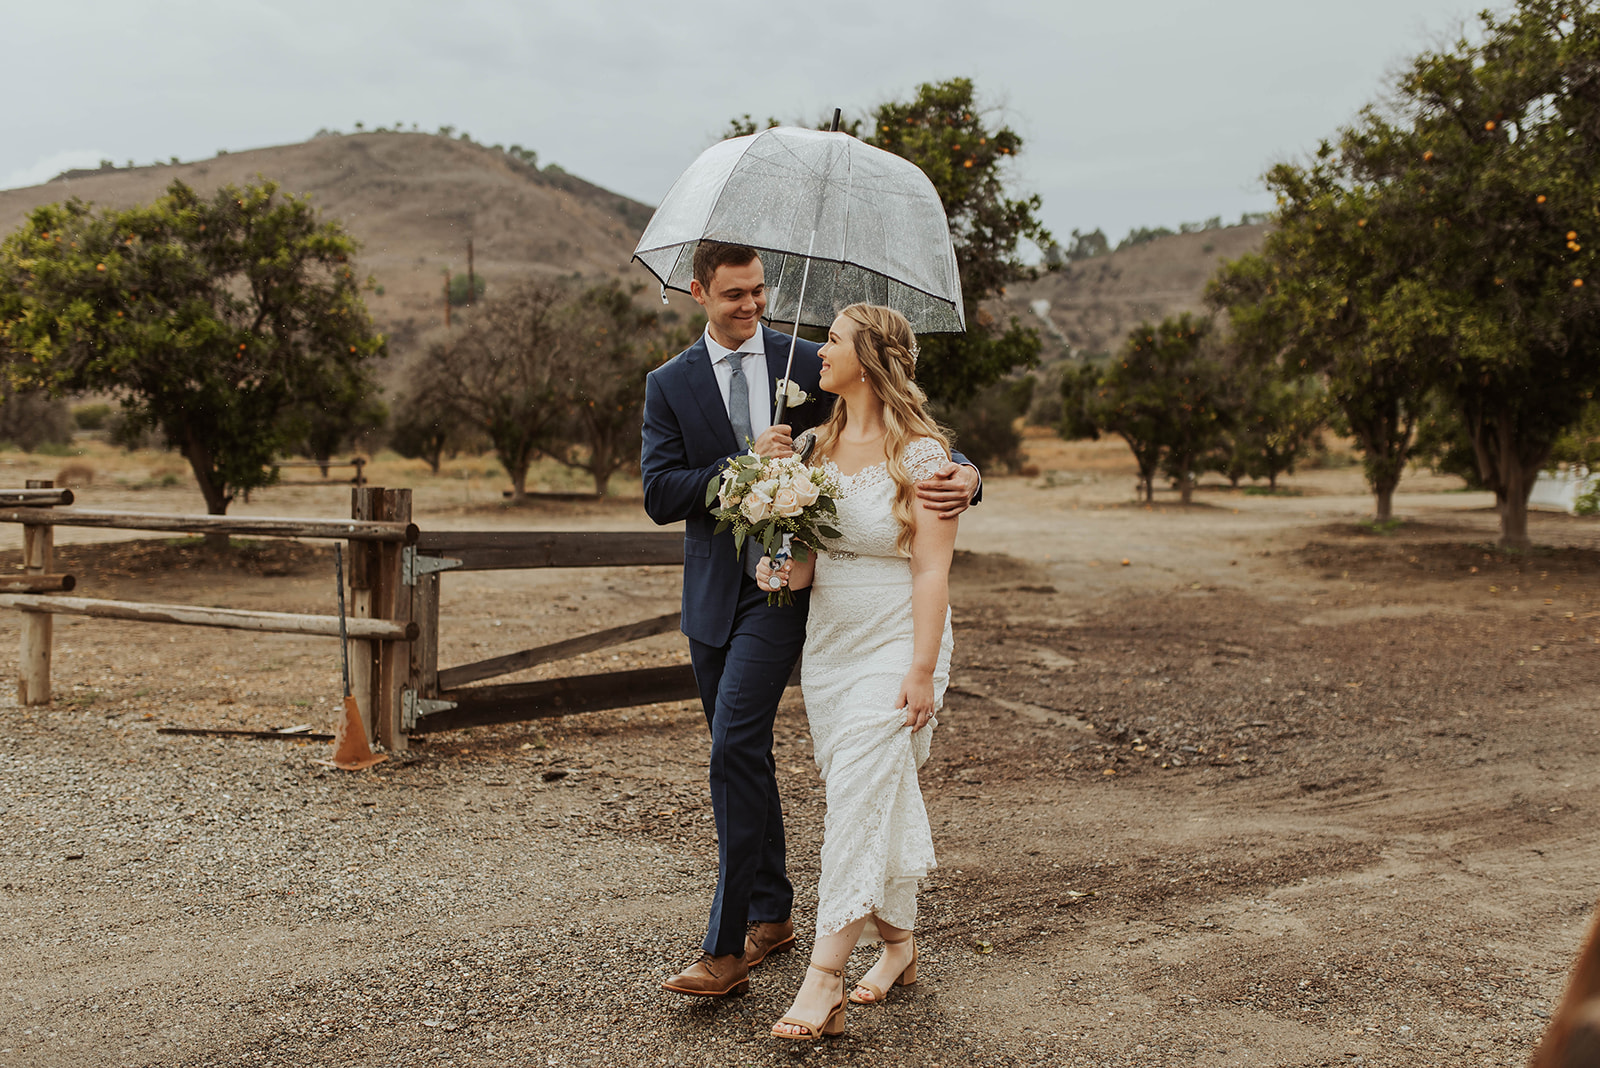 couple gets married at rainy outdoor wedding